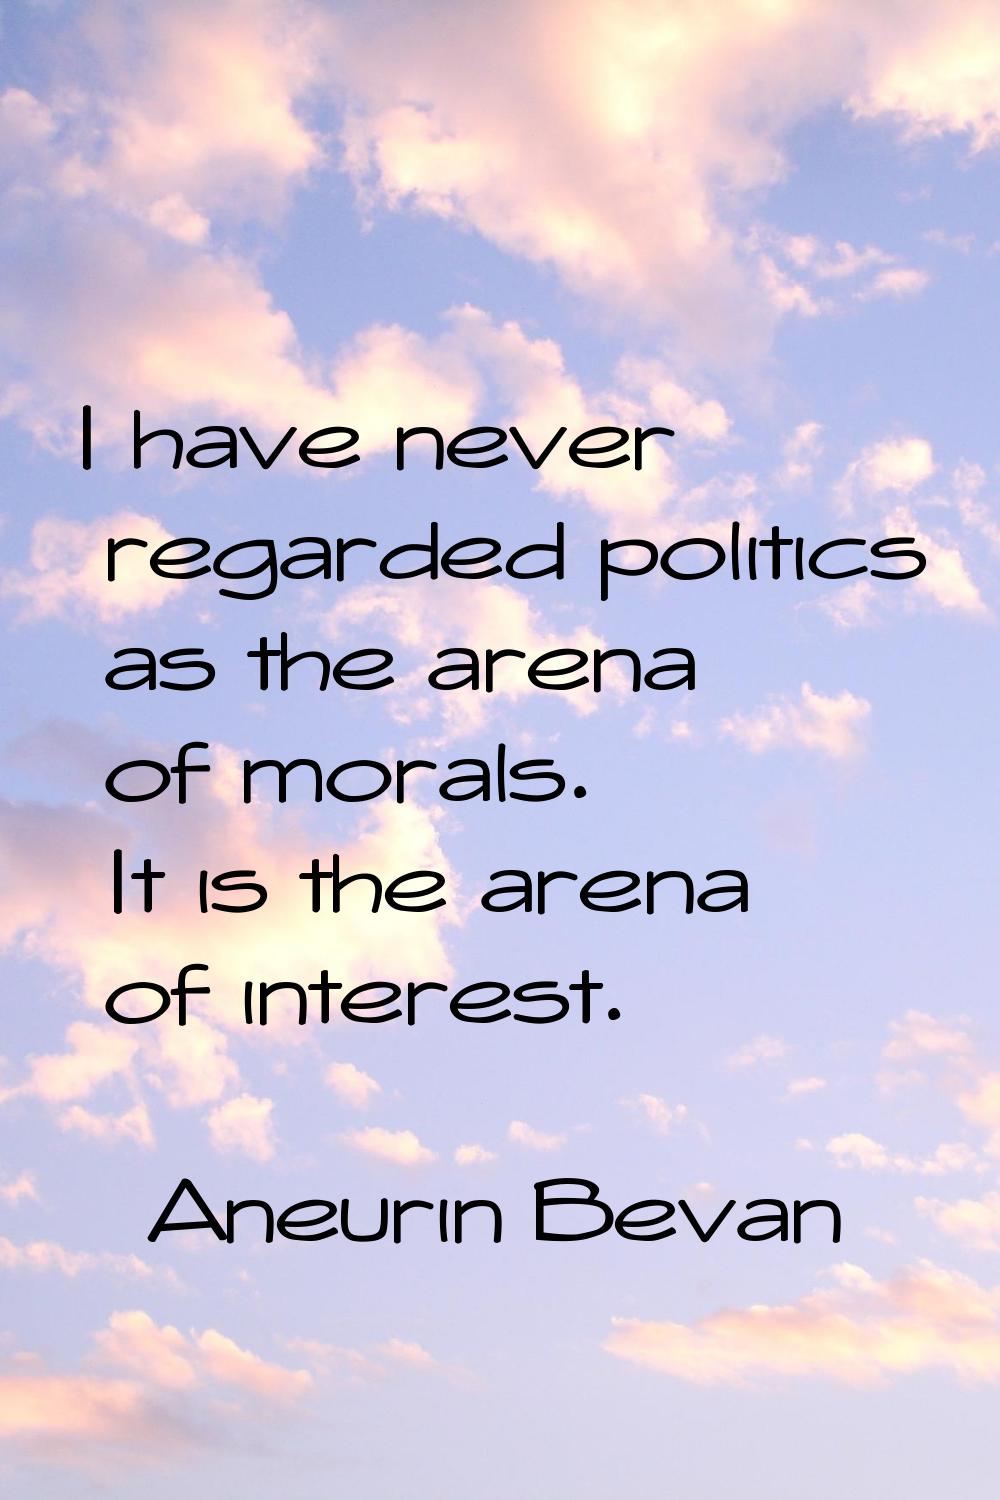 I have never regarded politics as the arena of morals. It is the arena of interest.